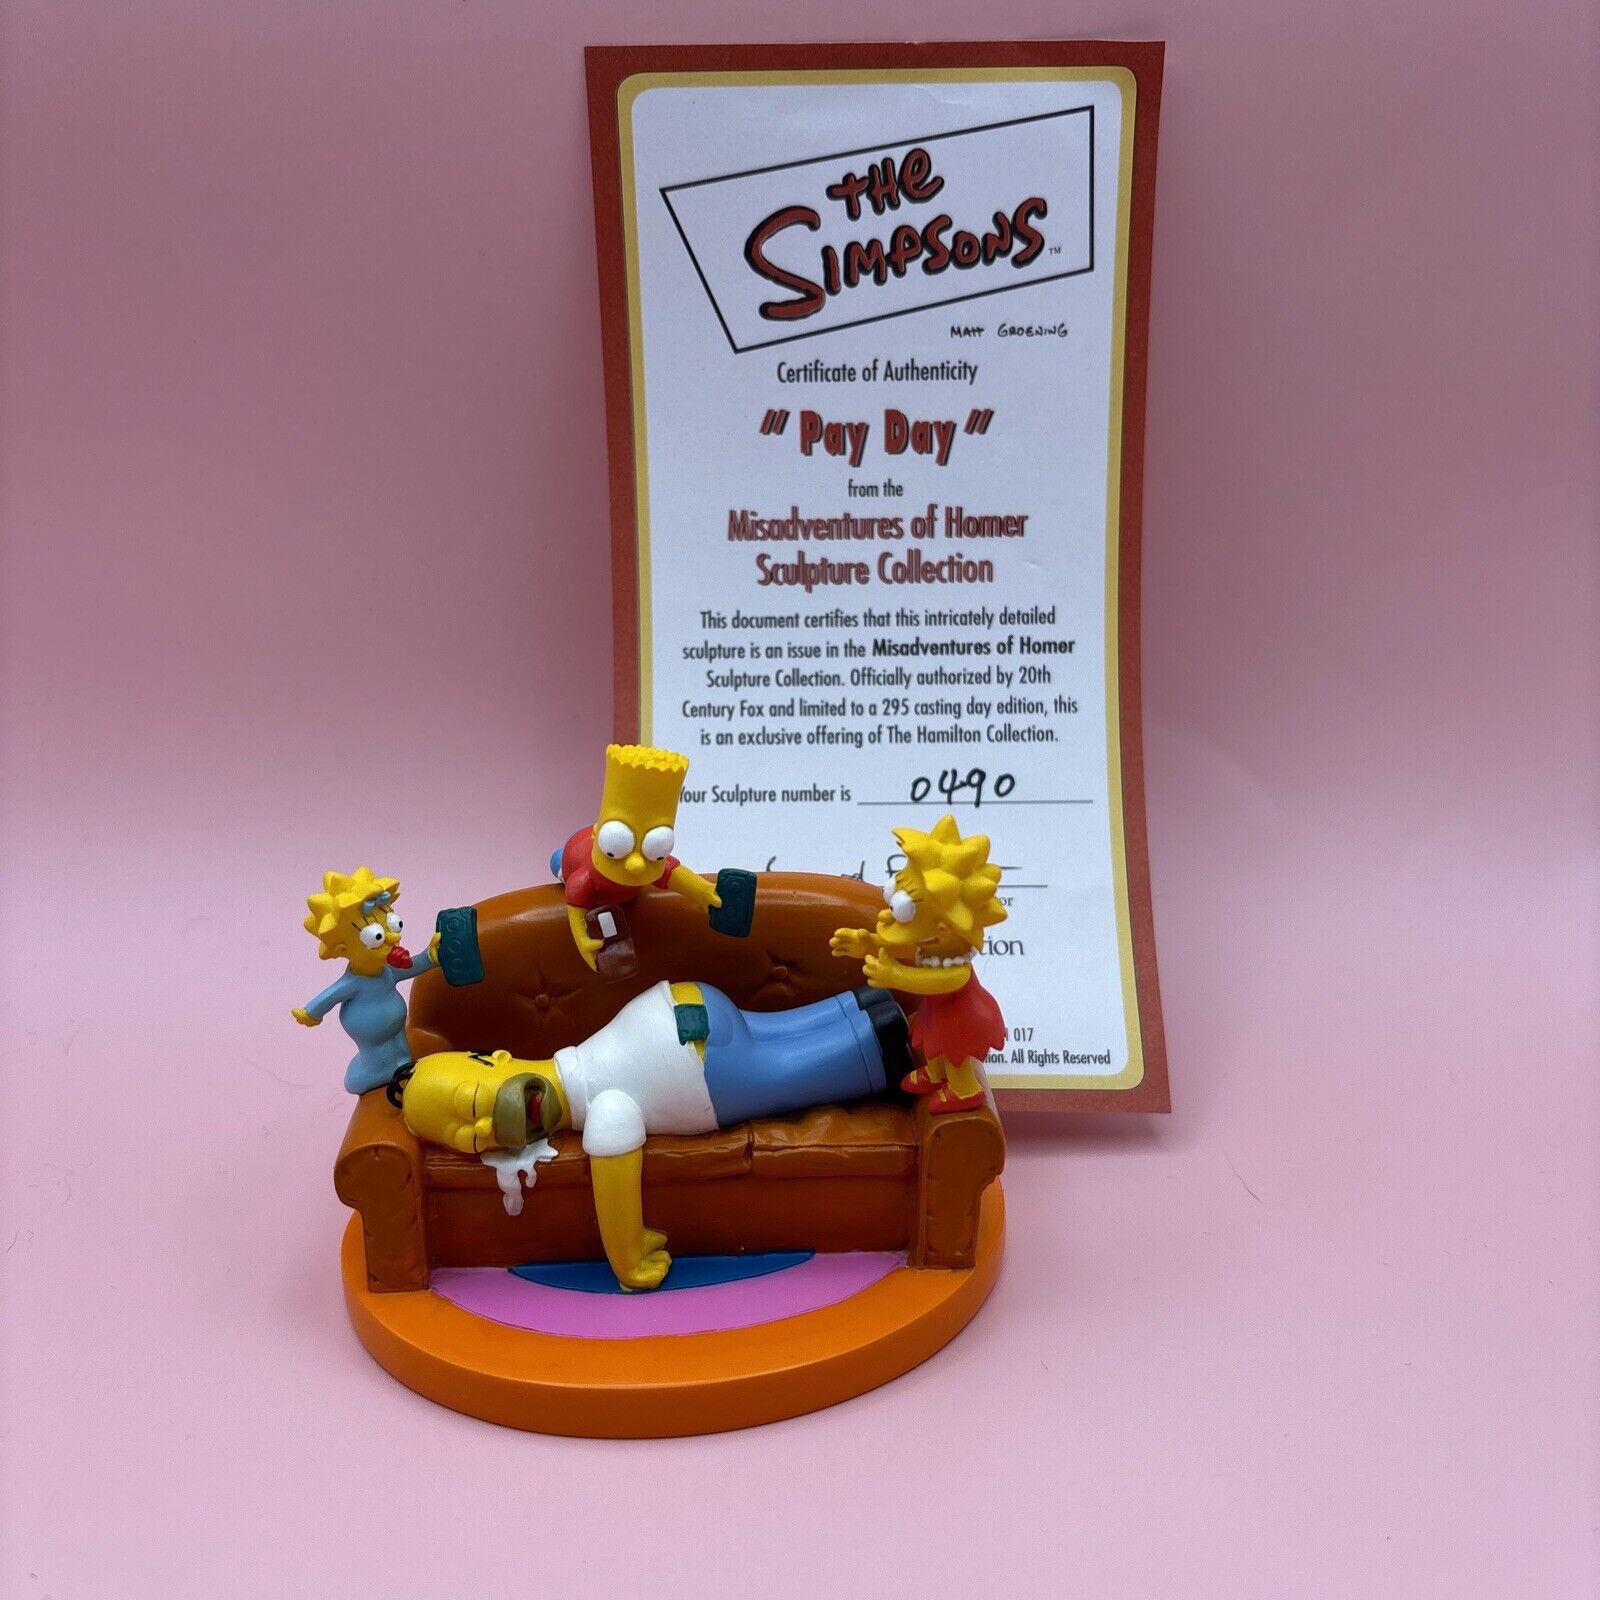 The Simpsons, Misadventures of Homer: “Pay Day” Hamilton Collection COA